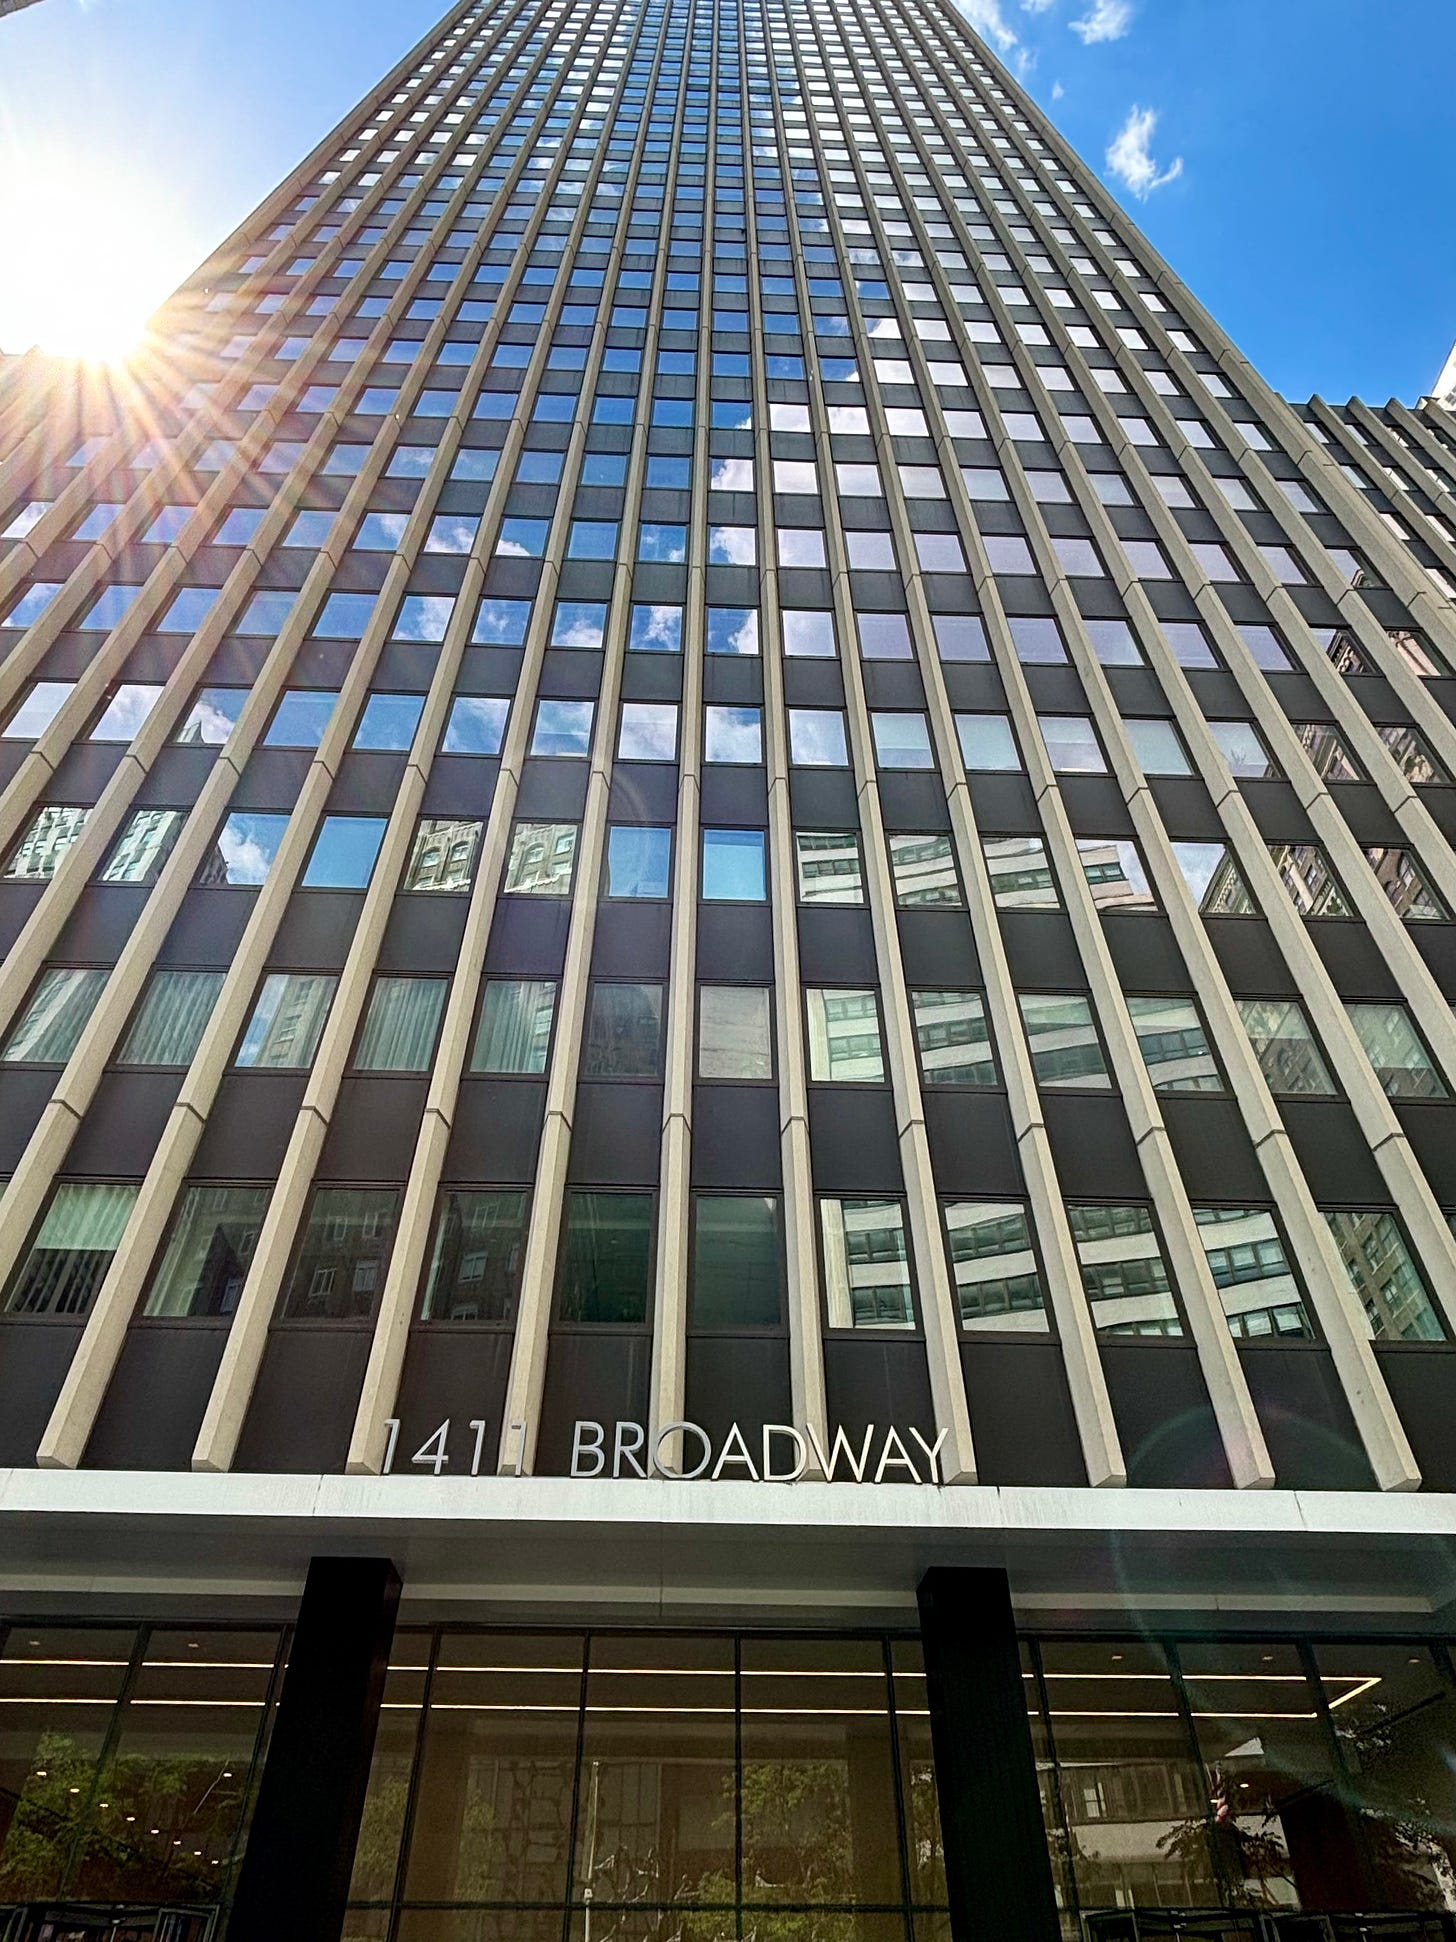 Looking up at 1411 Broadway. It is a large glass 60s style office tower reflecting the blue sky and clouds. The sun's rays create lines of force from behind the left side of the building.